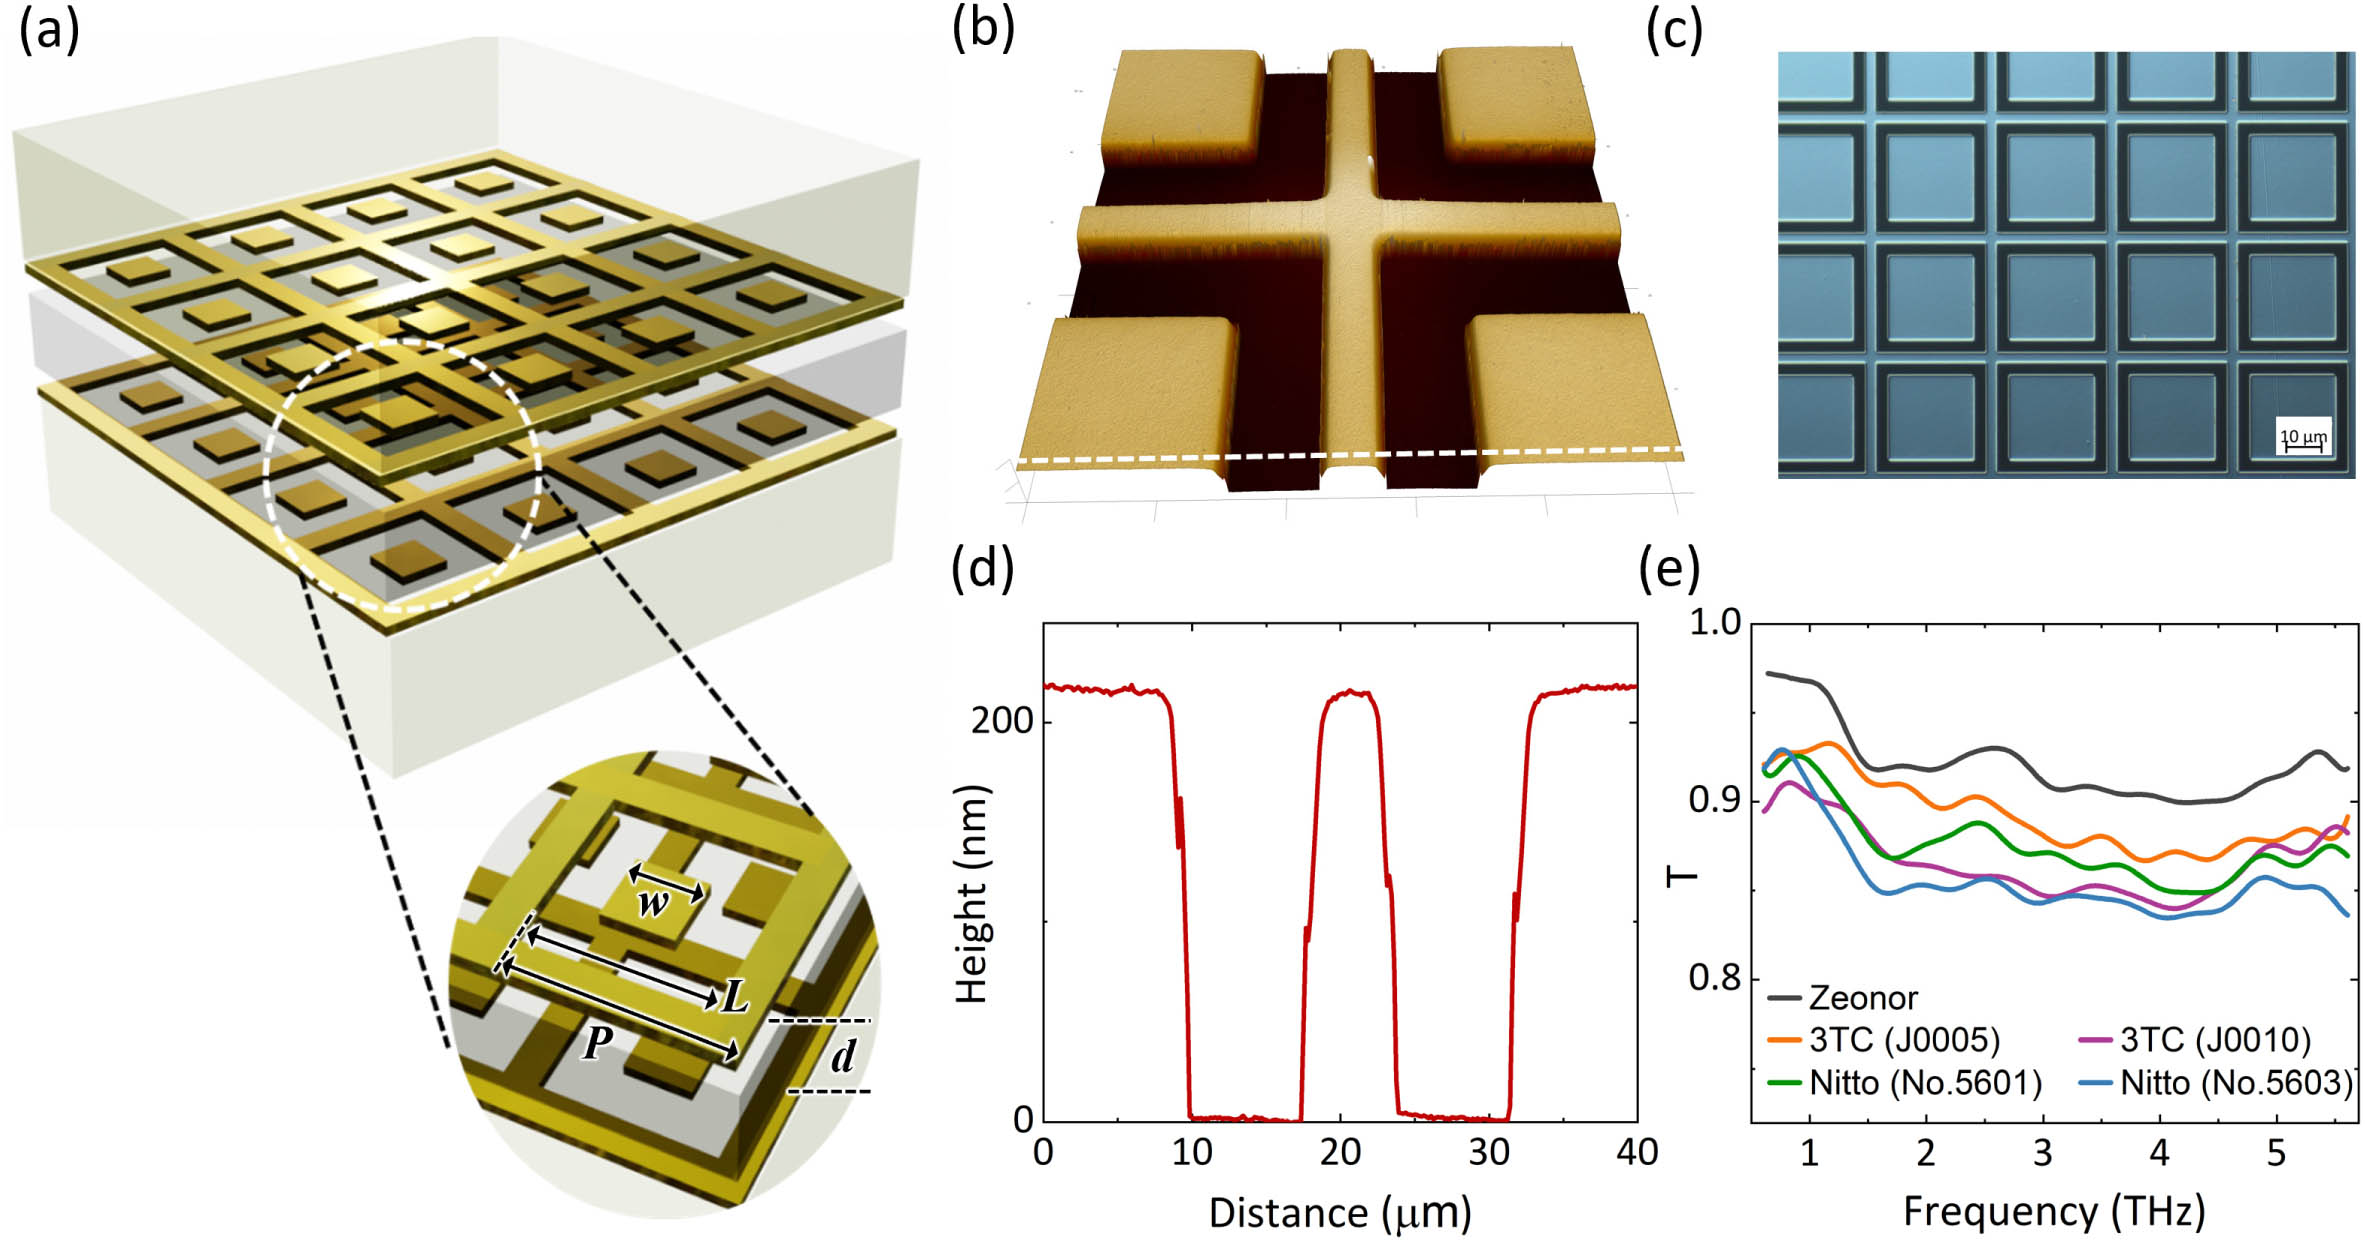 (a) General schematic of the bilayer-metamaterial (BLMM) bandpass filter. Two plasmonic metasurfaces are placed adjacent to each other separated by a dielectric coupling layer of thickness d. Each metasurface consists of an array of a metallic square-loop hole structure deposited on Zeonor, a THz transparent substrate. The lattice pitch (P), length of the outer square-loop hole (L), and length of the inner square-loop hole (w) of the array are labeled with black arrows. (b) 3D atomic force microscope (AFM) image and (c) optical microscope image of the device S2, and (d) corresponding depth profile indicating a metal depth of ∼220 nm. (e) THz power transmittance of the commercial double-sided adhesive tapes from Nitto and 3TC used in the fabrication of the BLMM and 2BLMM devices. In this experiment, the double-sided tapes are laminated on a Zeonor substrate and the spectral transmission measured through that substrate is also displayed (black line).